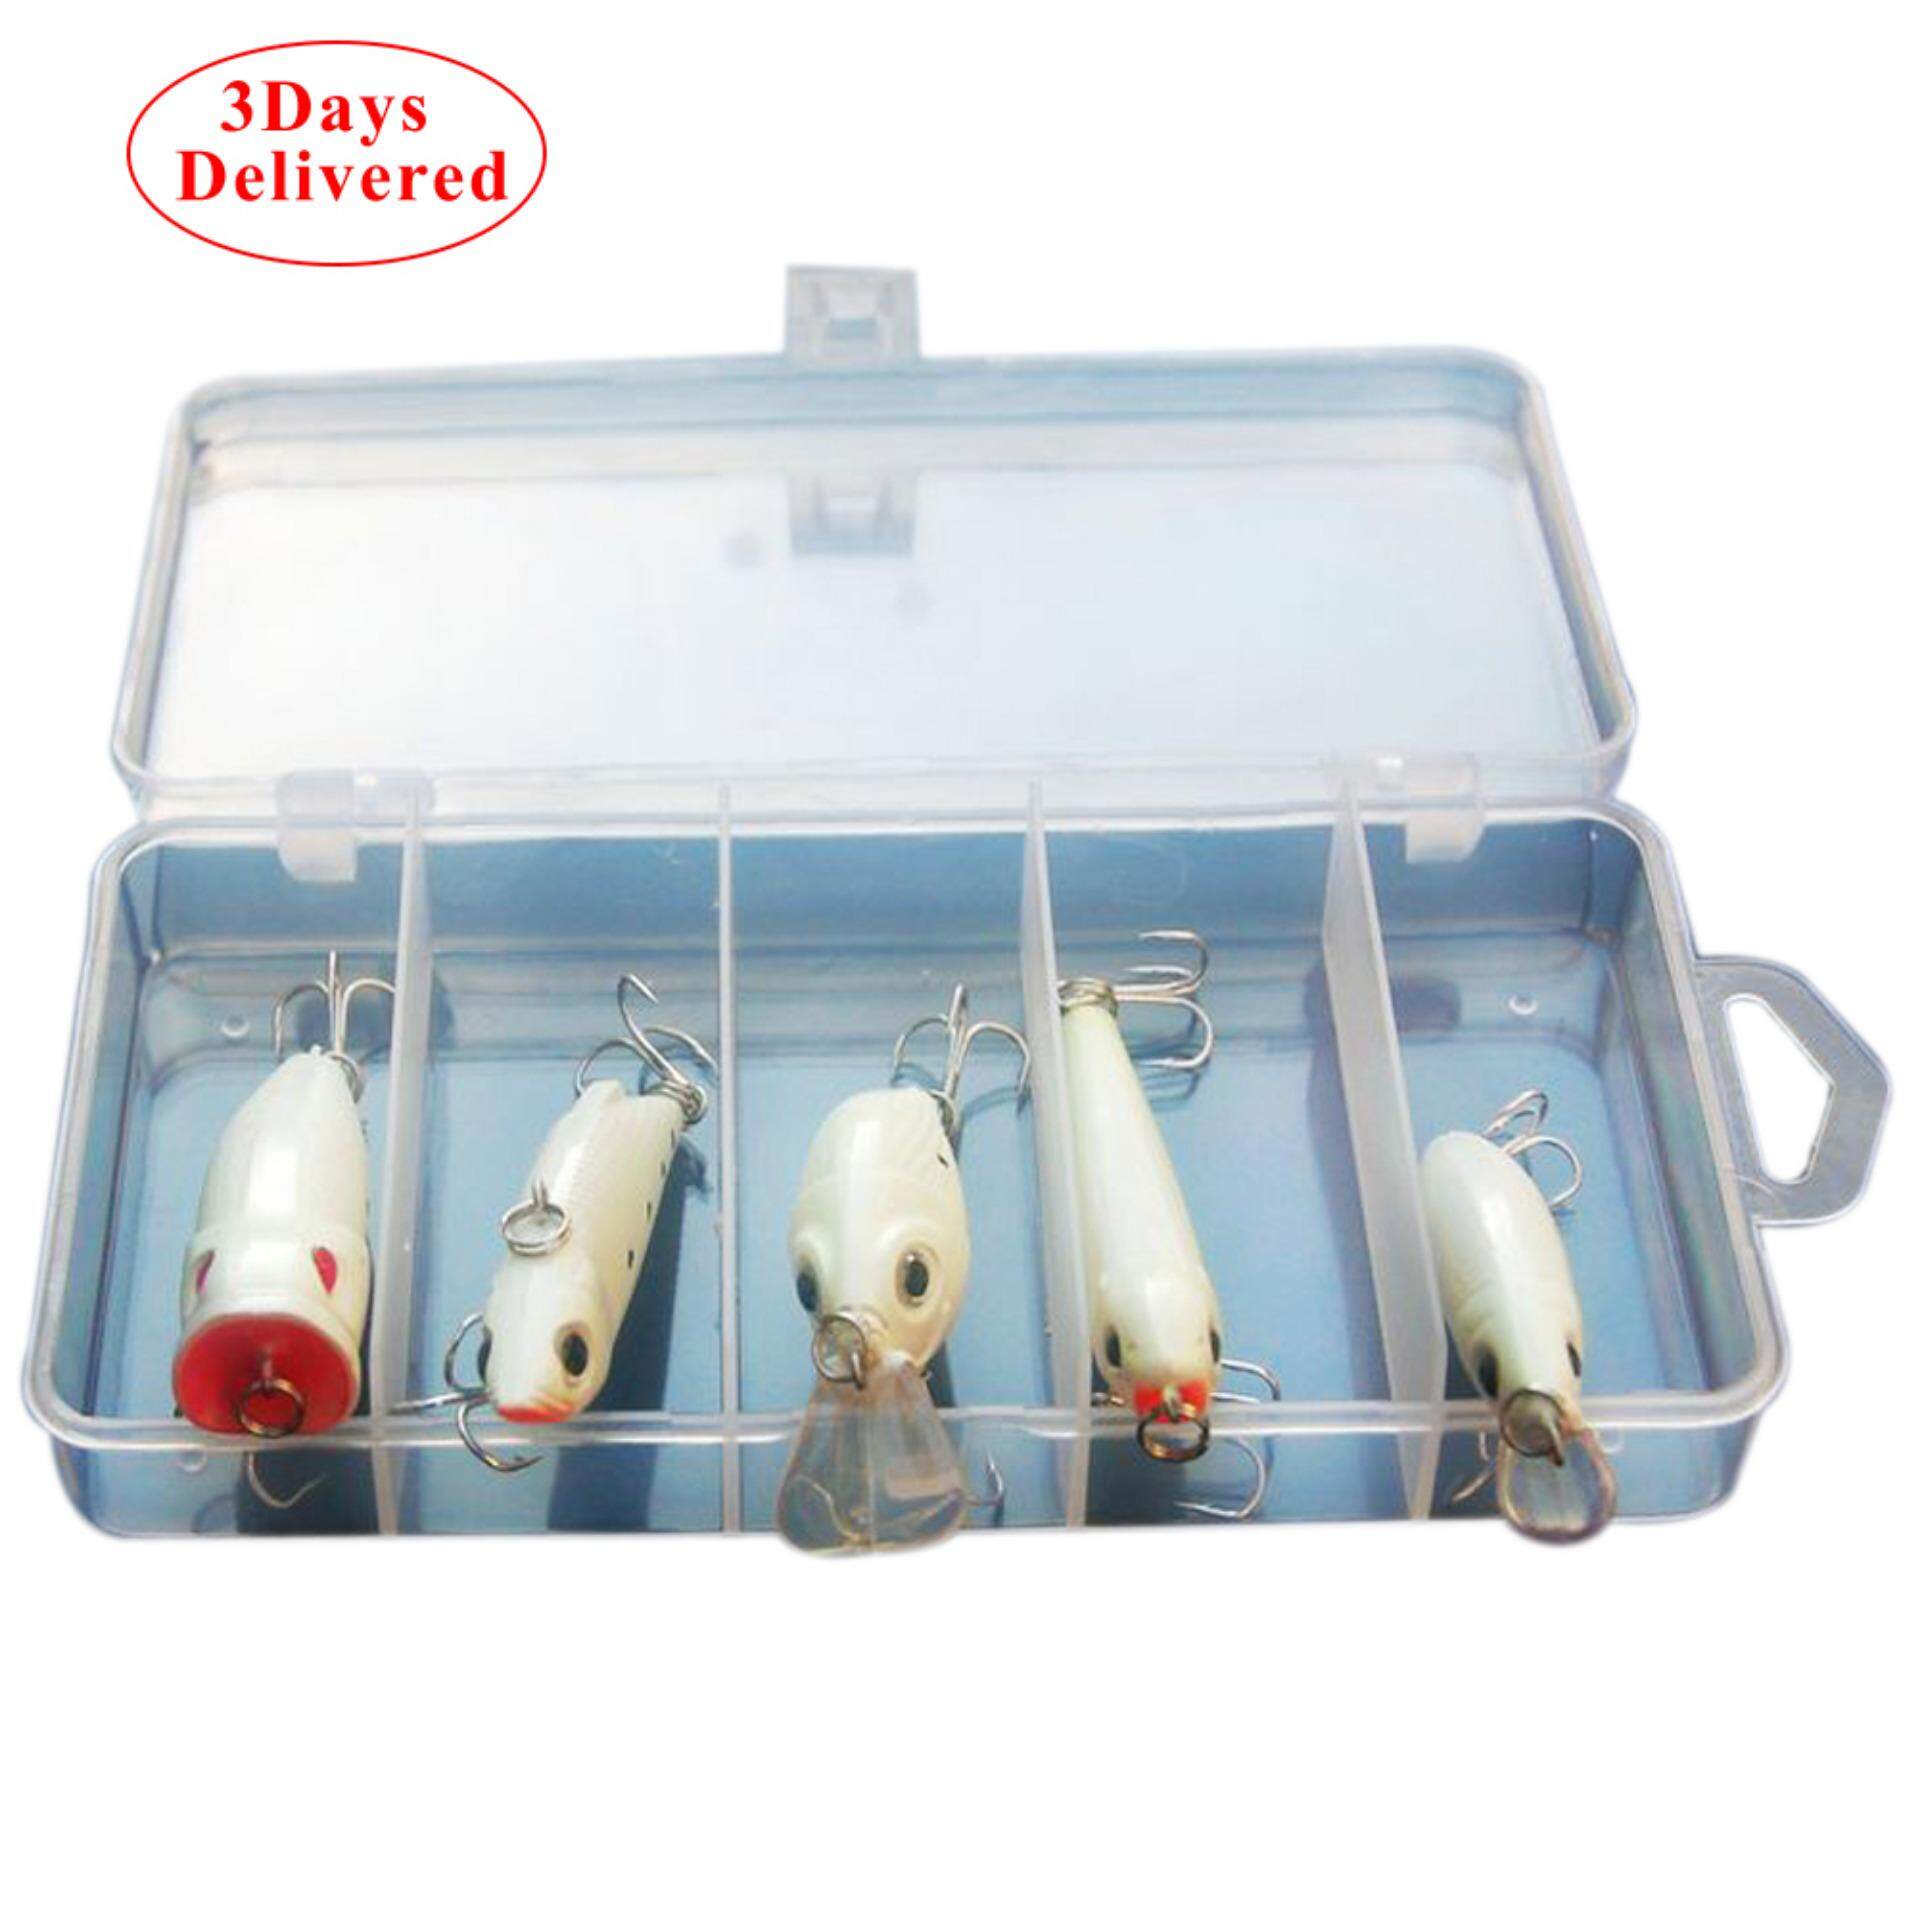 Fast Delivered within 3 DAYS + Free Shipping Night Fishing Bait Kit Luminous Popper Crank Minnow Pencil Glow Lure (MY)